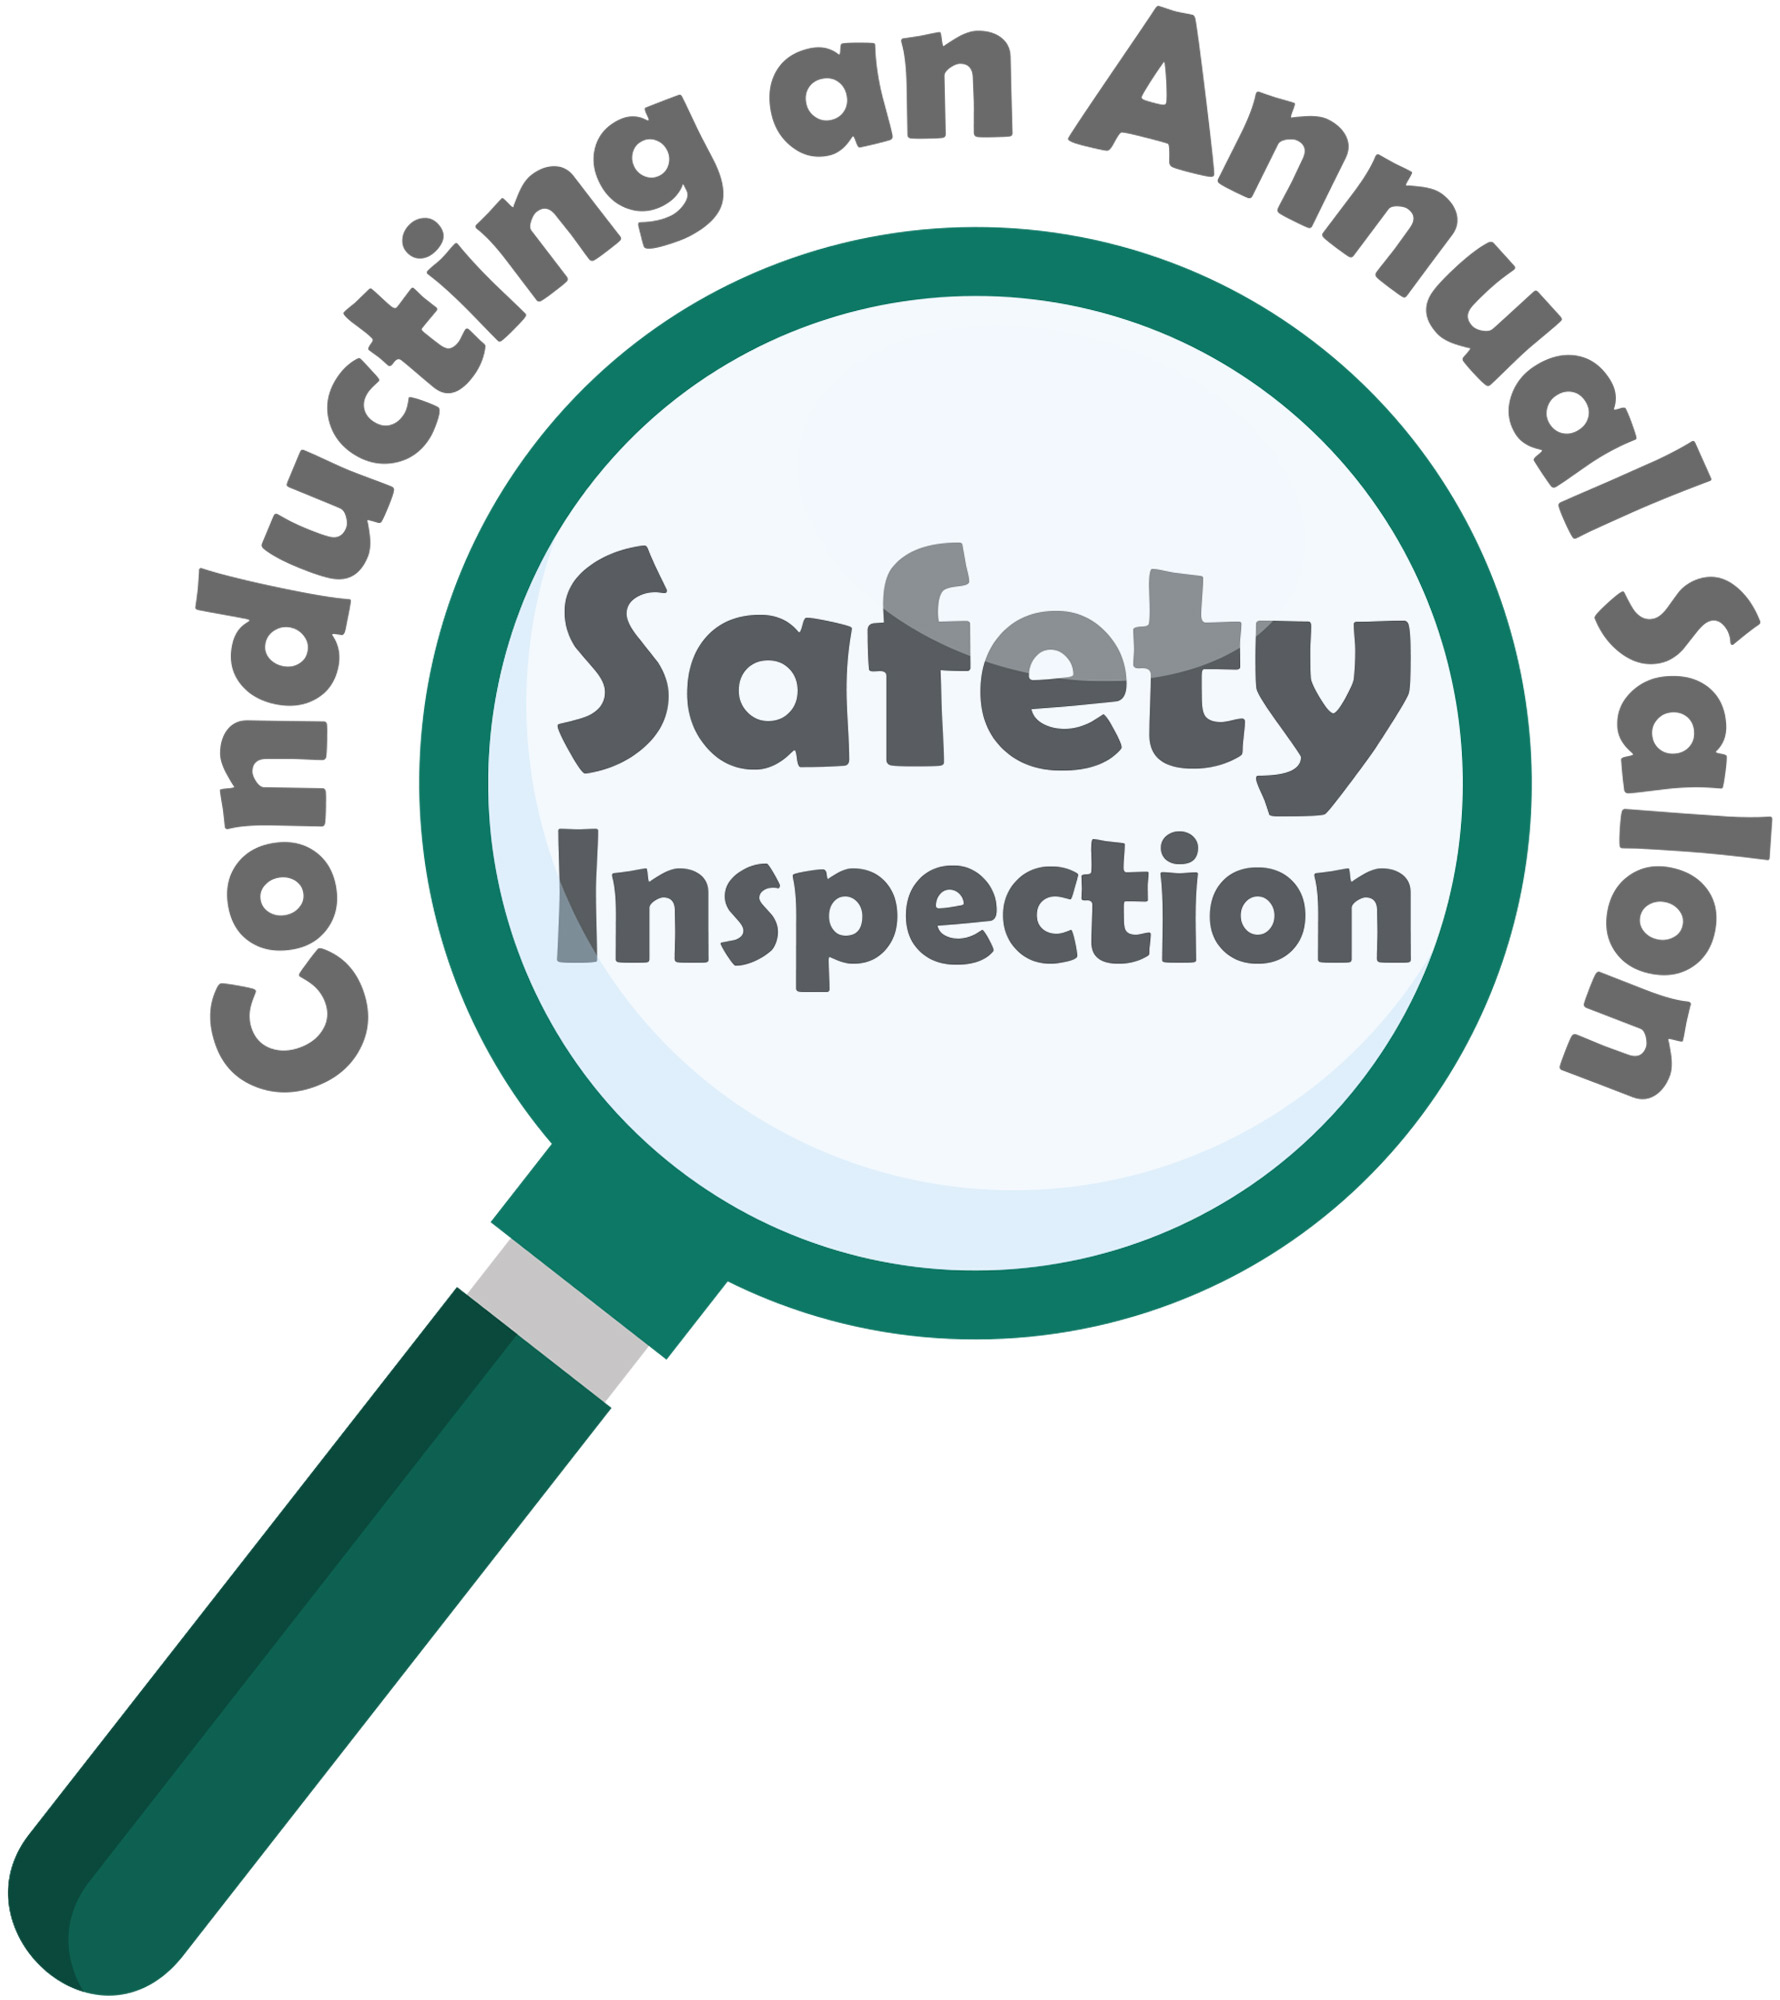 Conducting an Annual Salon Safety Inspection typography with a large magnifying glass